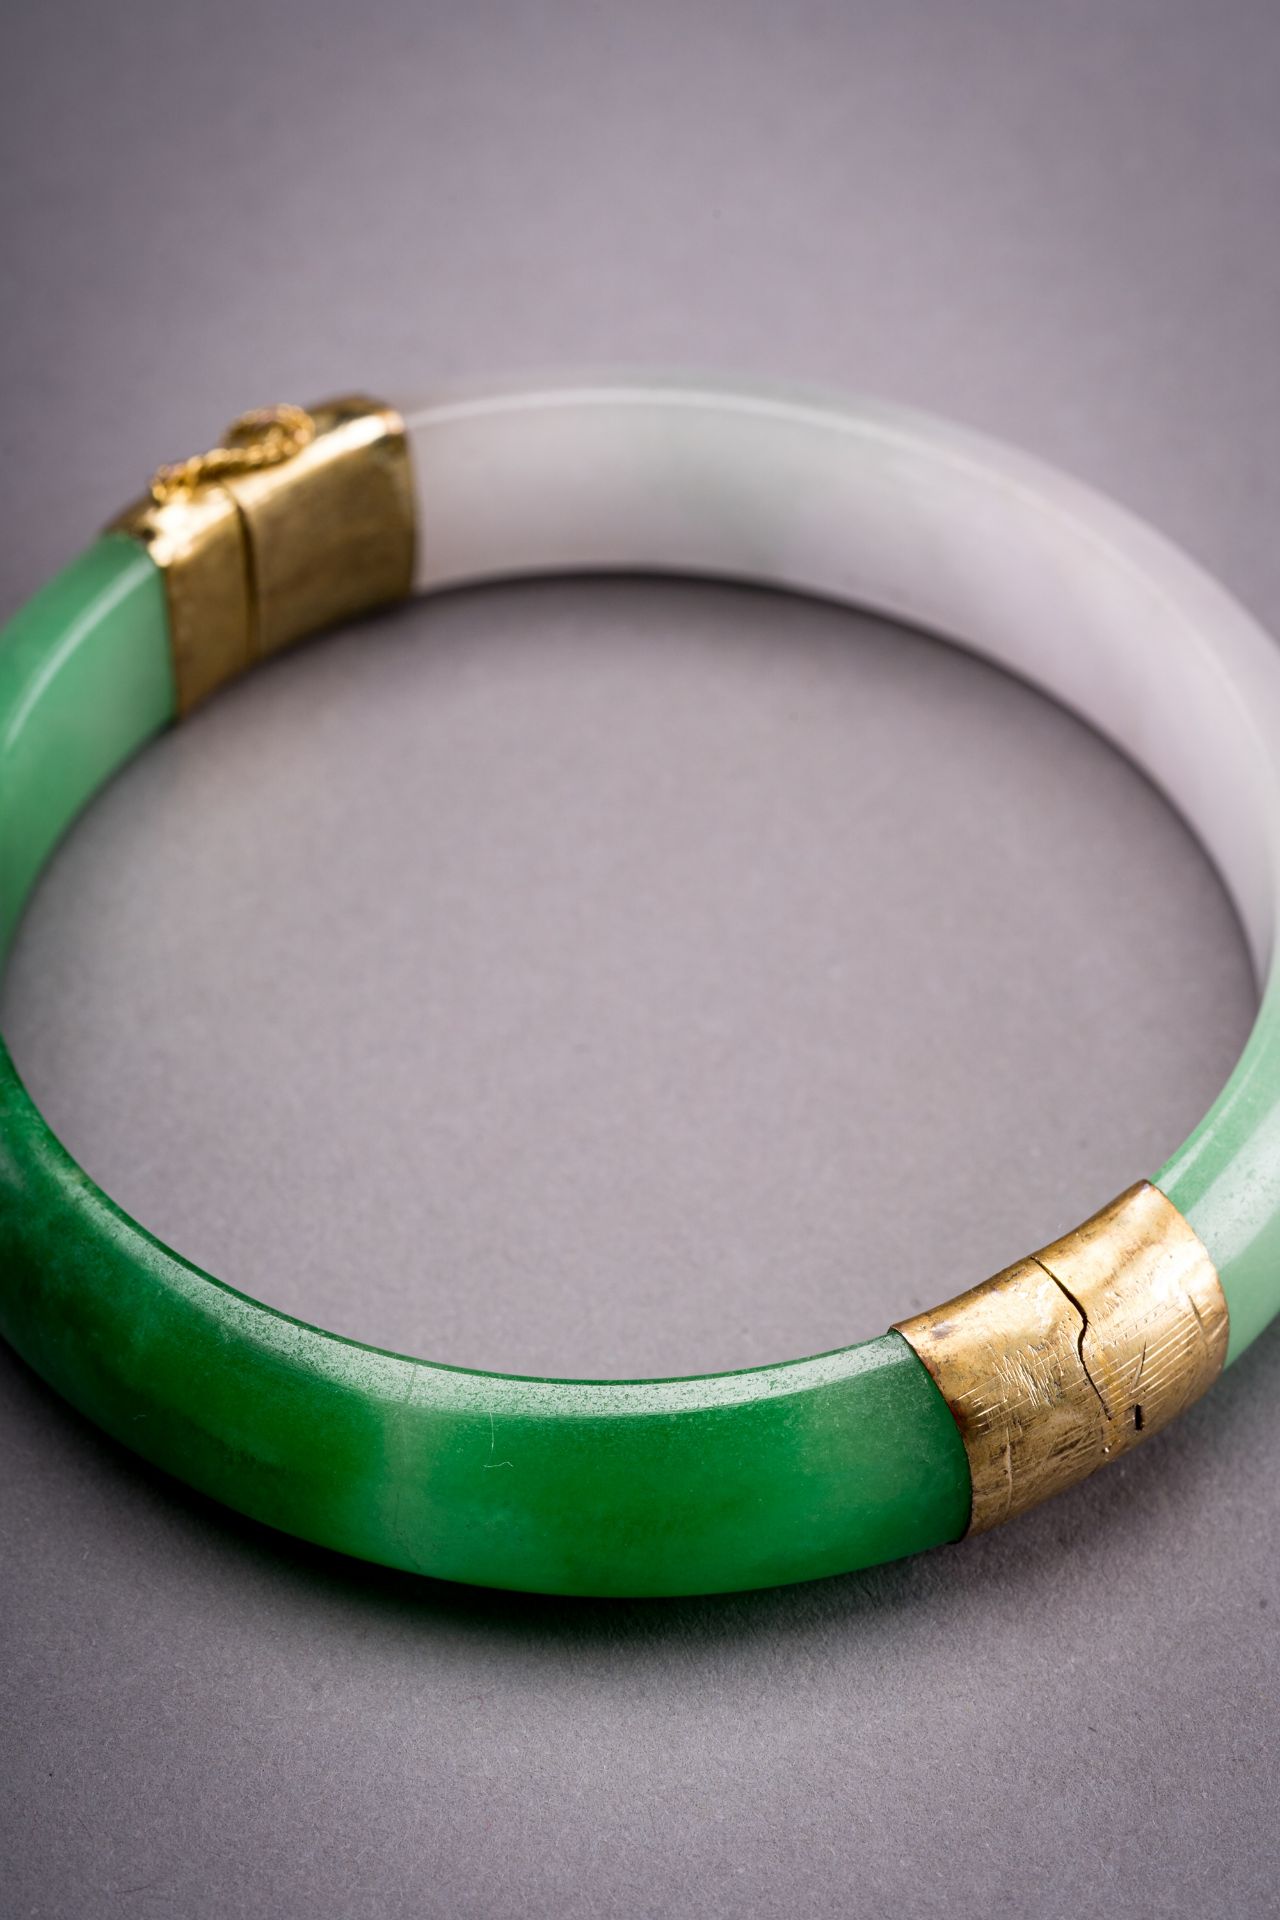 A PALE LAVENDER AND EMERALD GREEN JADEITE BANGLE - Image 2 of 7